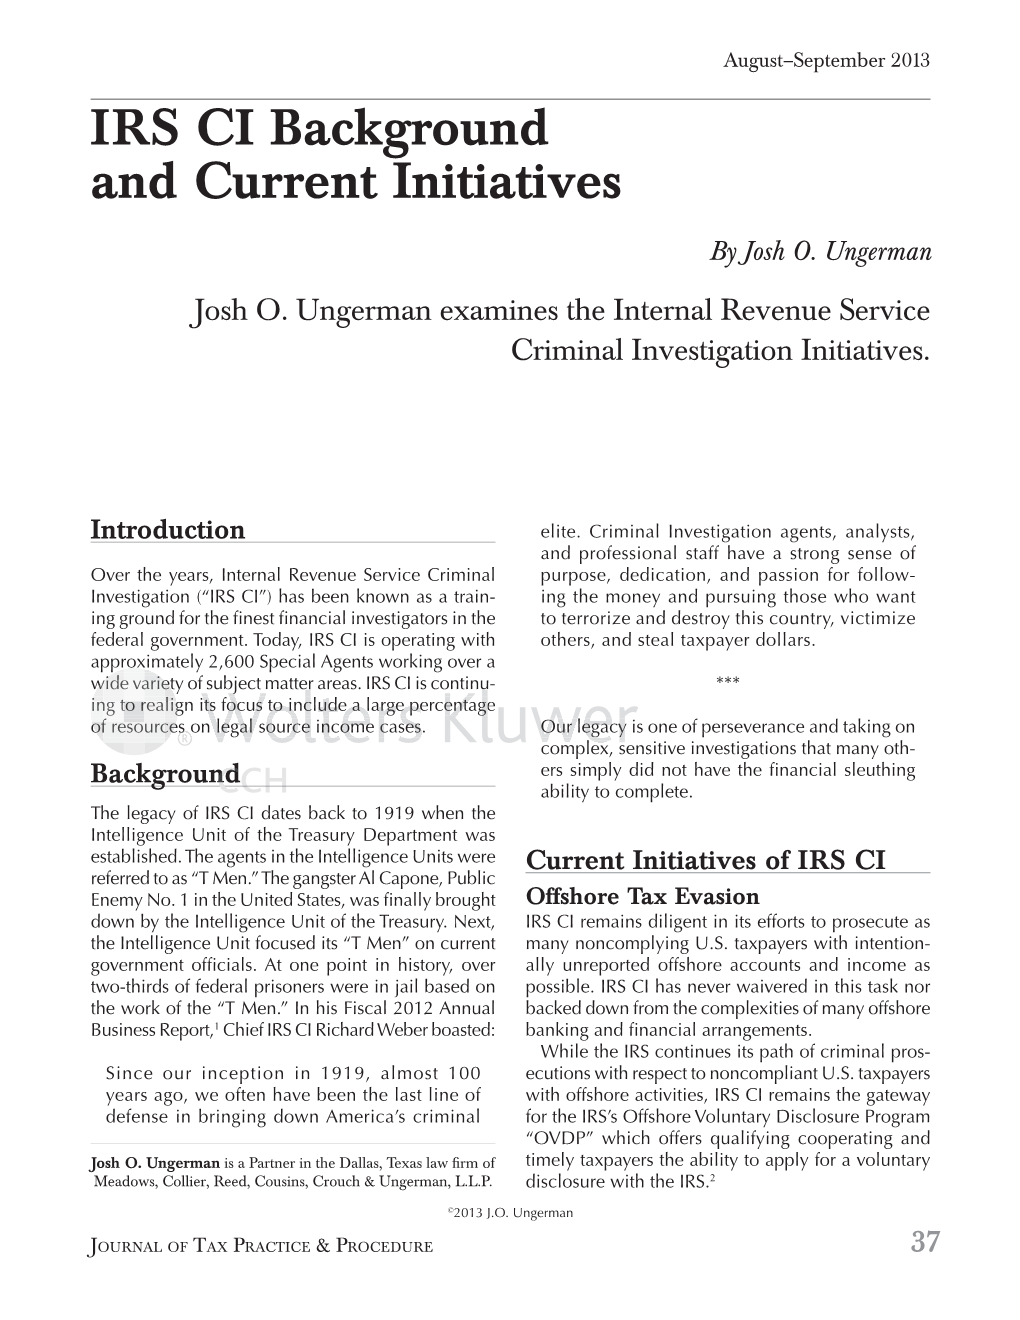 IRS CI Background and Current Initiatives